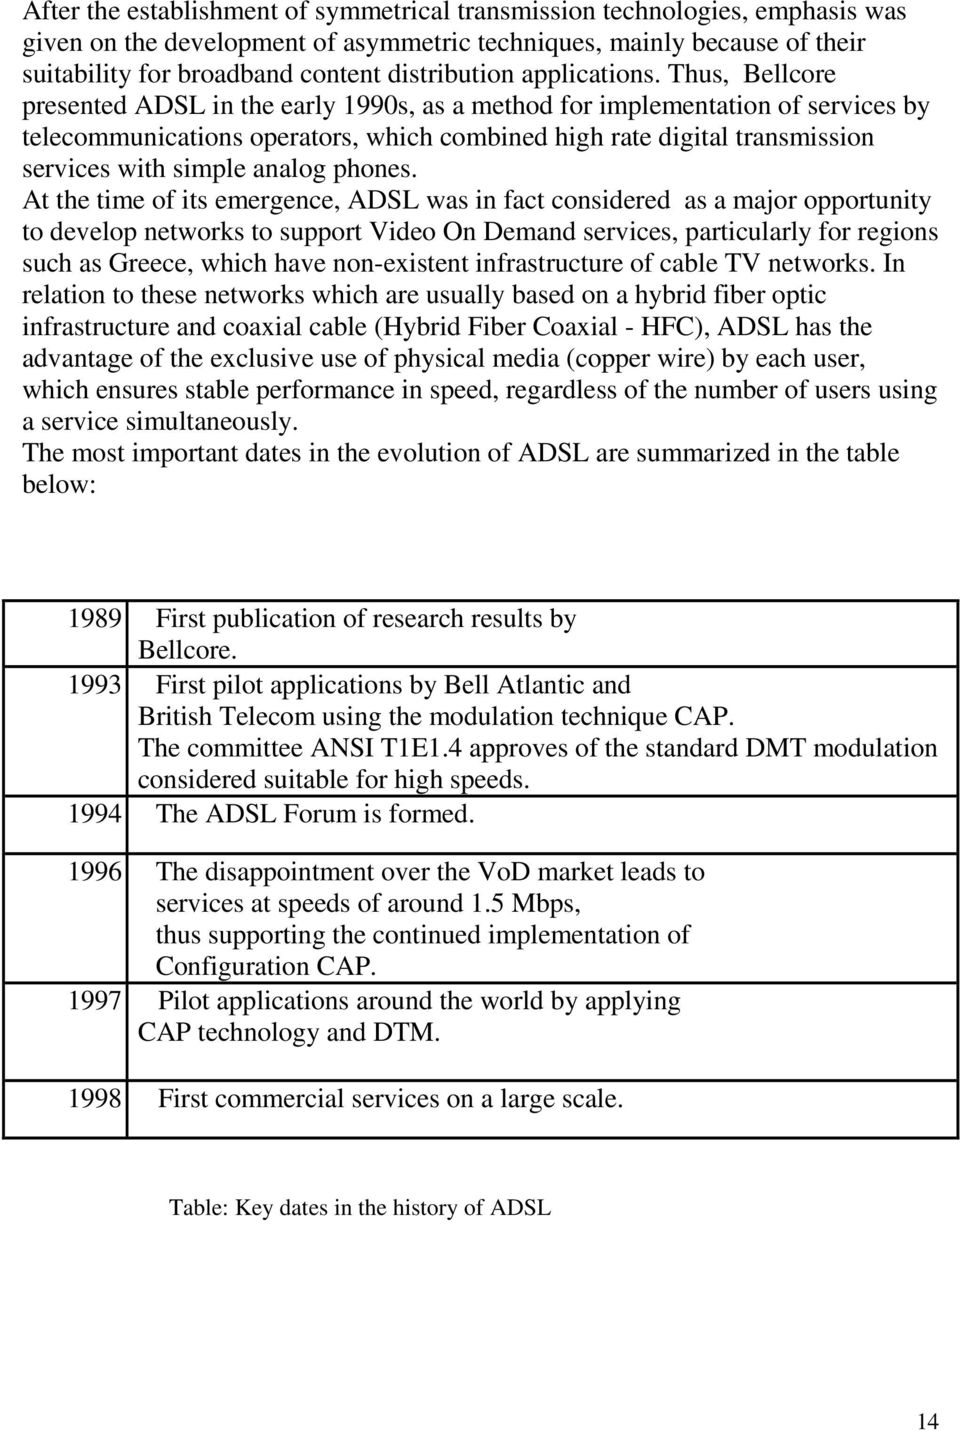 Thus, Bellcore presented ADSL in the early 1990s, as a method for implementation of services by telecommunications operators, which combined high rate digital transmission services with simple analog